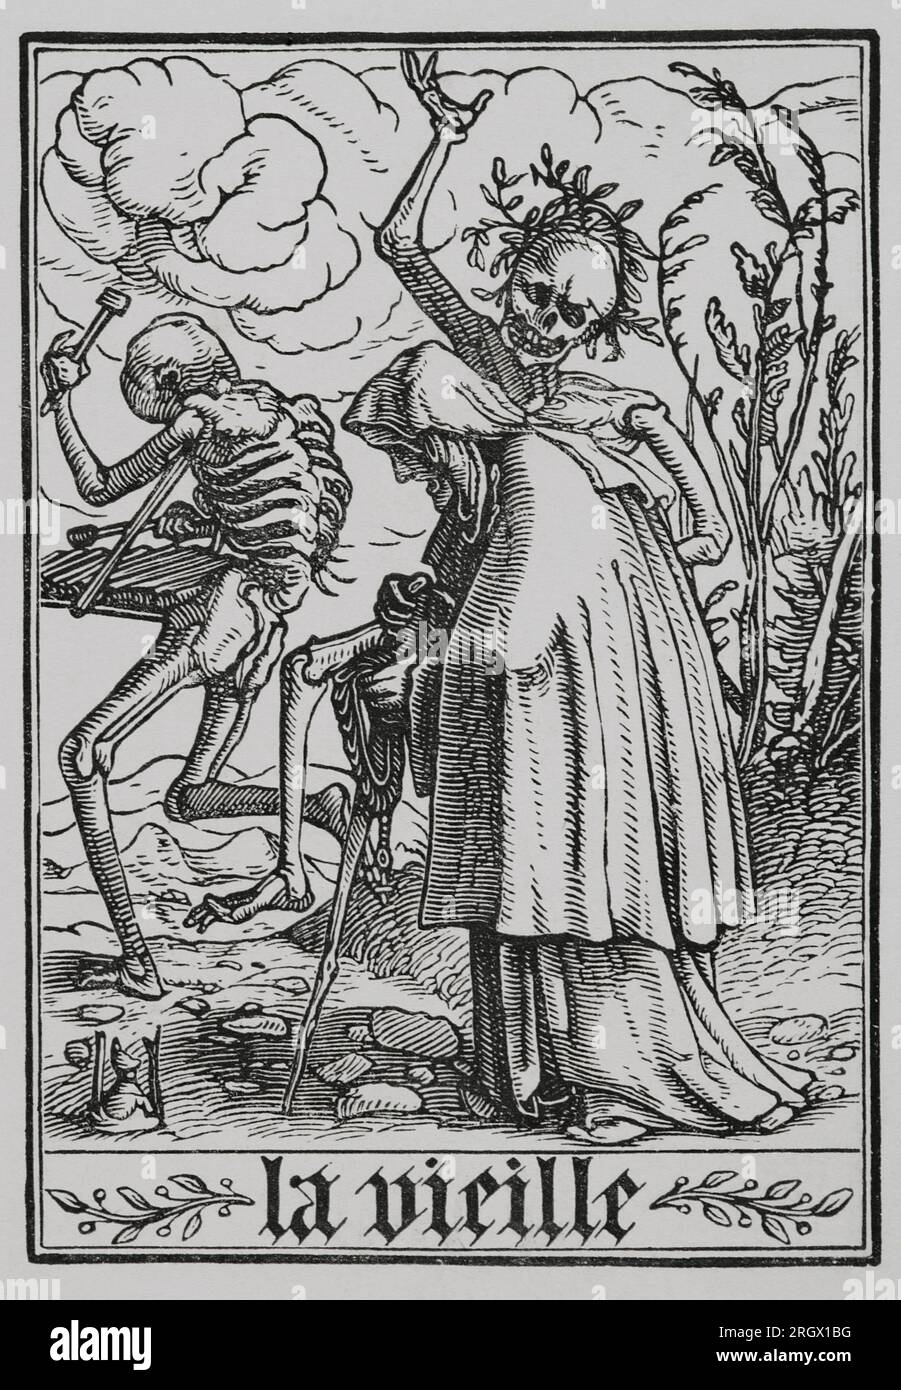 The Old Woman. Death is depicted guiding an old woman who walks with the help of a cane and holding a rosary in her hand. Another skeleton leads the way while playing a musical percussion instrument. Facsimile of an engraving belonging to the series 'The Dance of Death' by Hans Holbein the Younger, in 'Les Simulachres et Histoires facées de la Mort', 1538. 'Vie Militaire et Religieuse au Moyen Age et à l'Epoque de la Renaissance'. Paris, 1877. Stock Photo